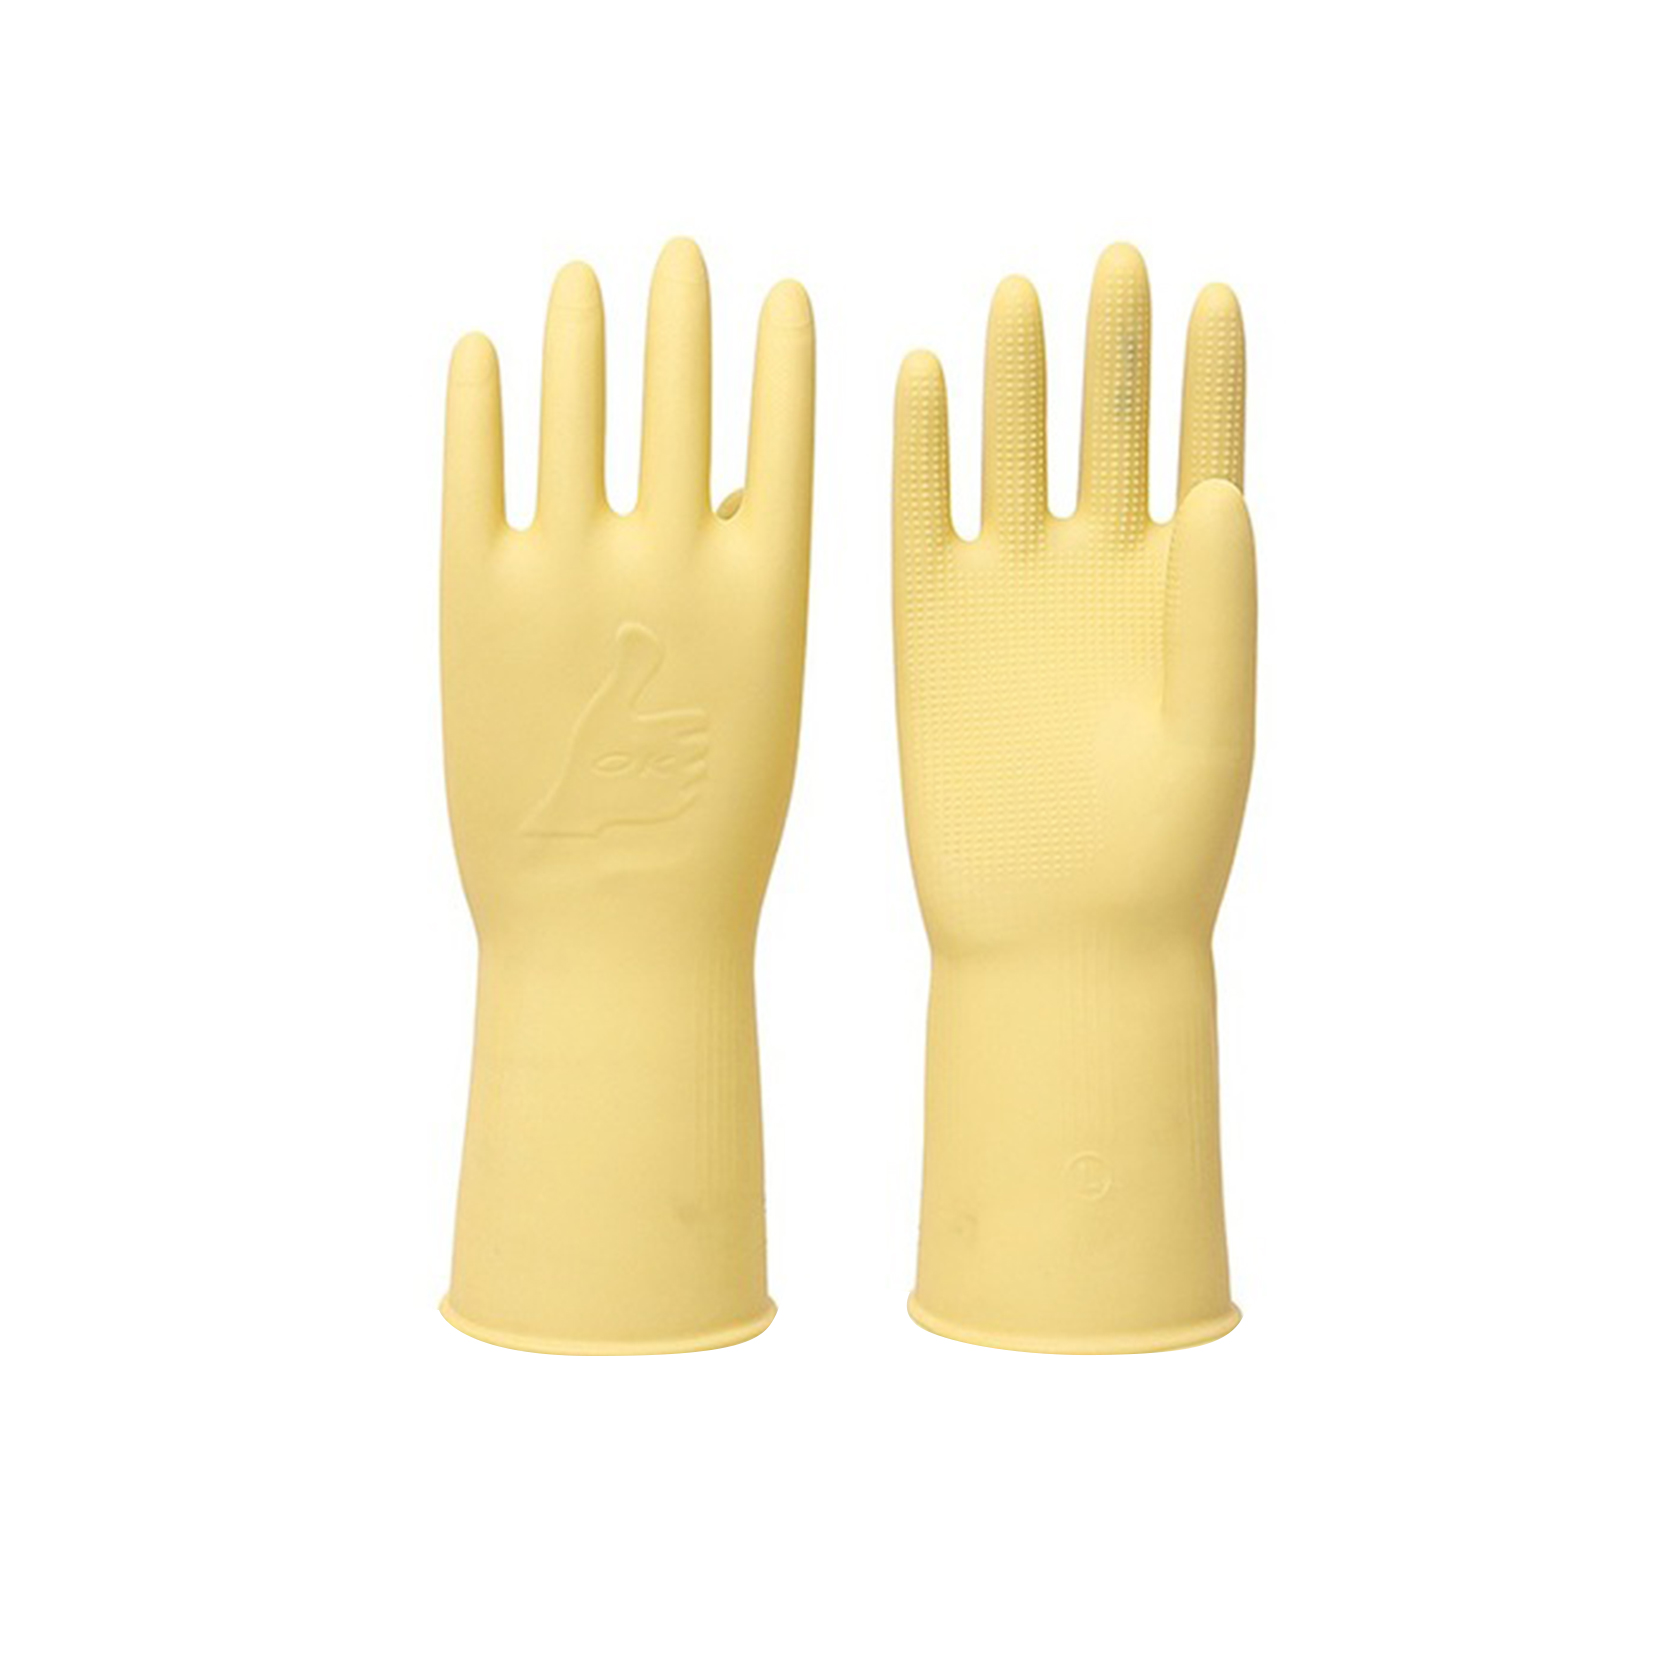 Manufacturer Wholesale Reusable Latex Household Kitchen Waterproof Dishwashing Gloves Natural Color 32cm Rubber Cleaning Gloves